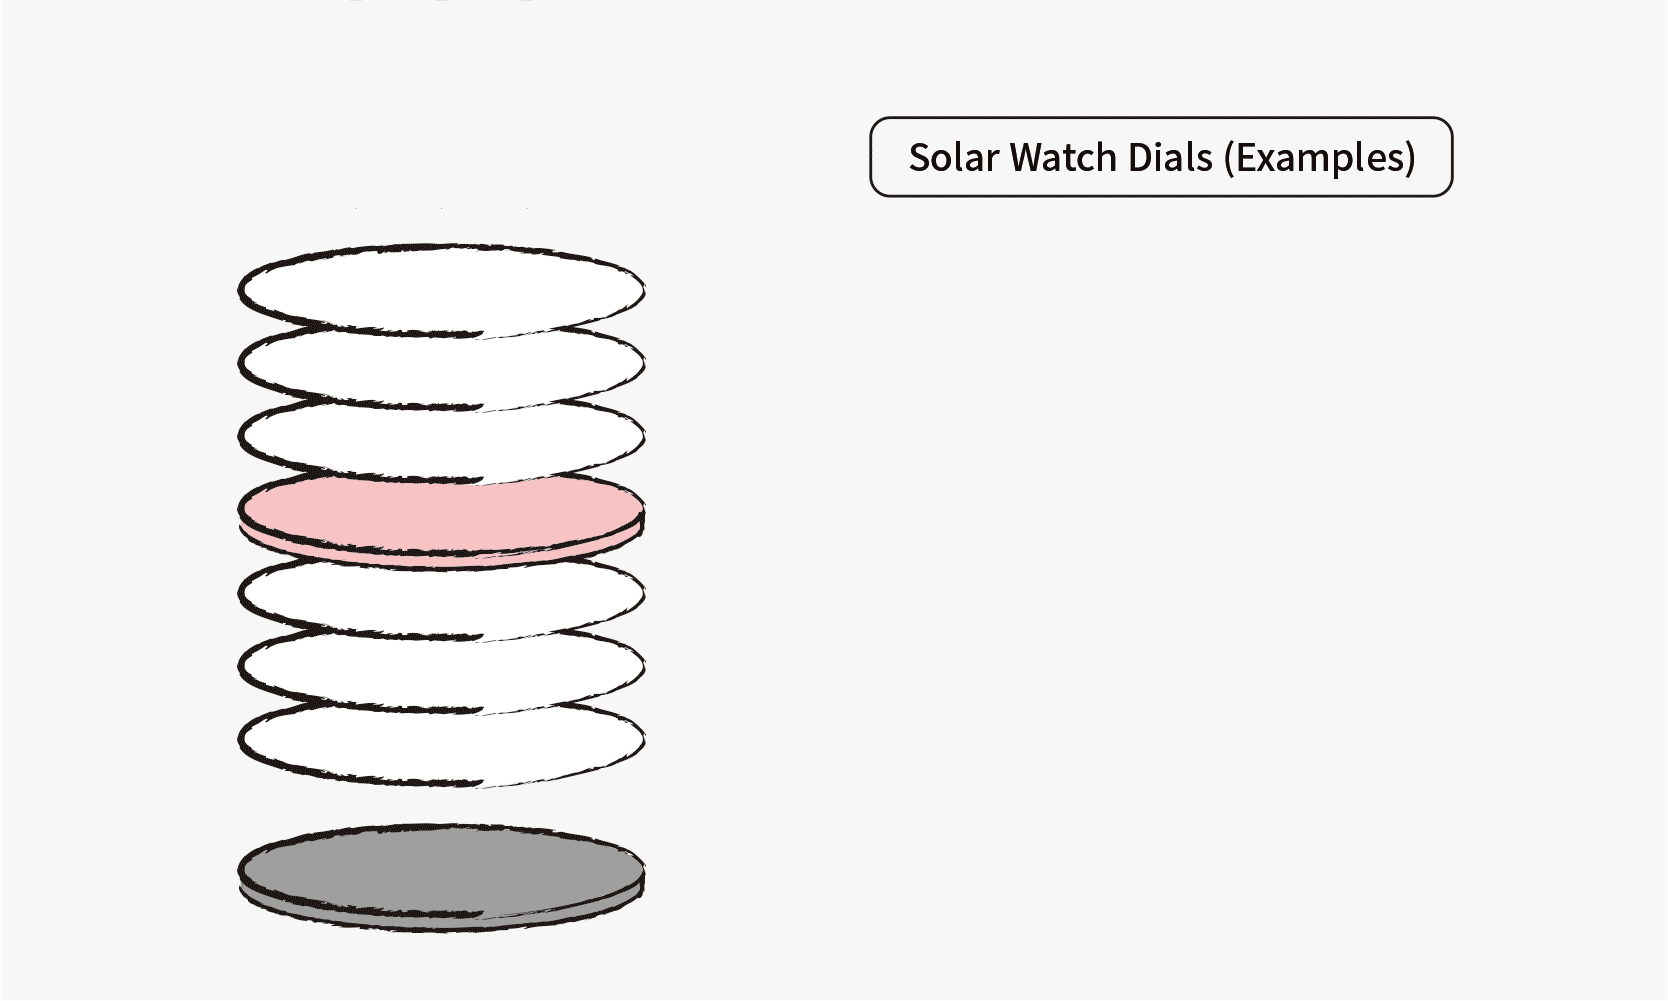 Solar Watch Dial (Example) / 1st layer: upper surface pattern printing / 2nd layer: upper surface half matte coating / 3rd layer: upper surface iregularity processing / 4th layer: dial's main body / 5th layer: lower surface pattern printing / 6th layer: lower surface coating / 7th layer: half mirror sheet / 8th layer: solar cell